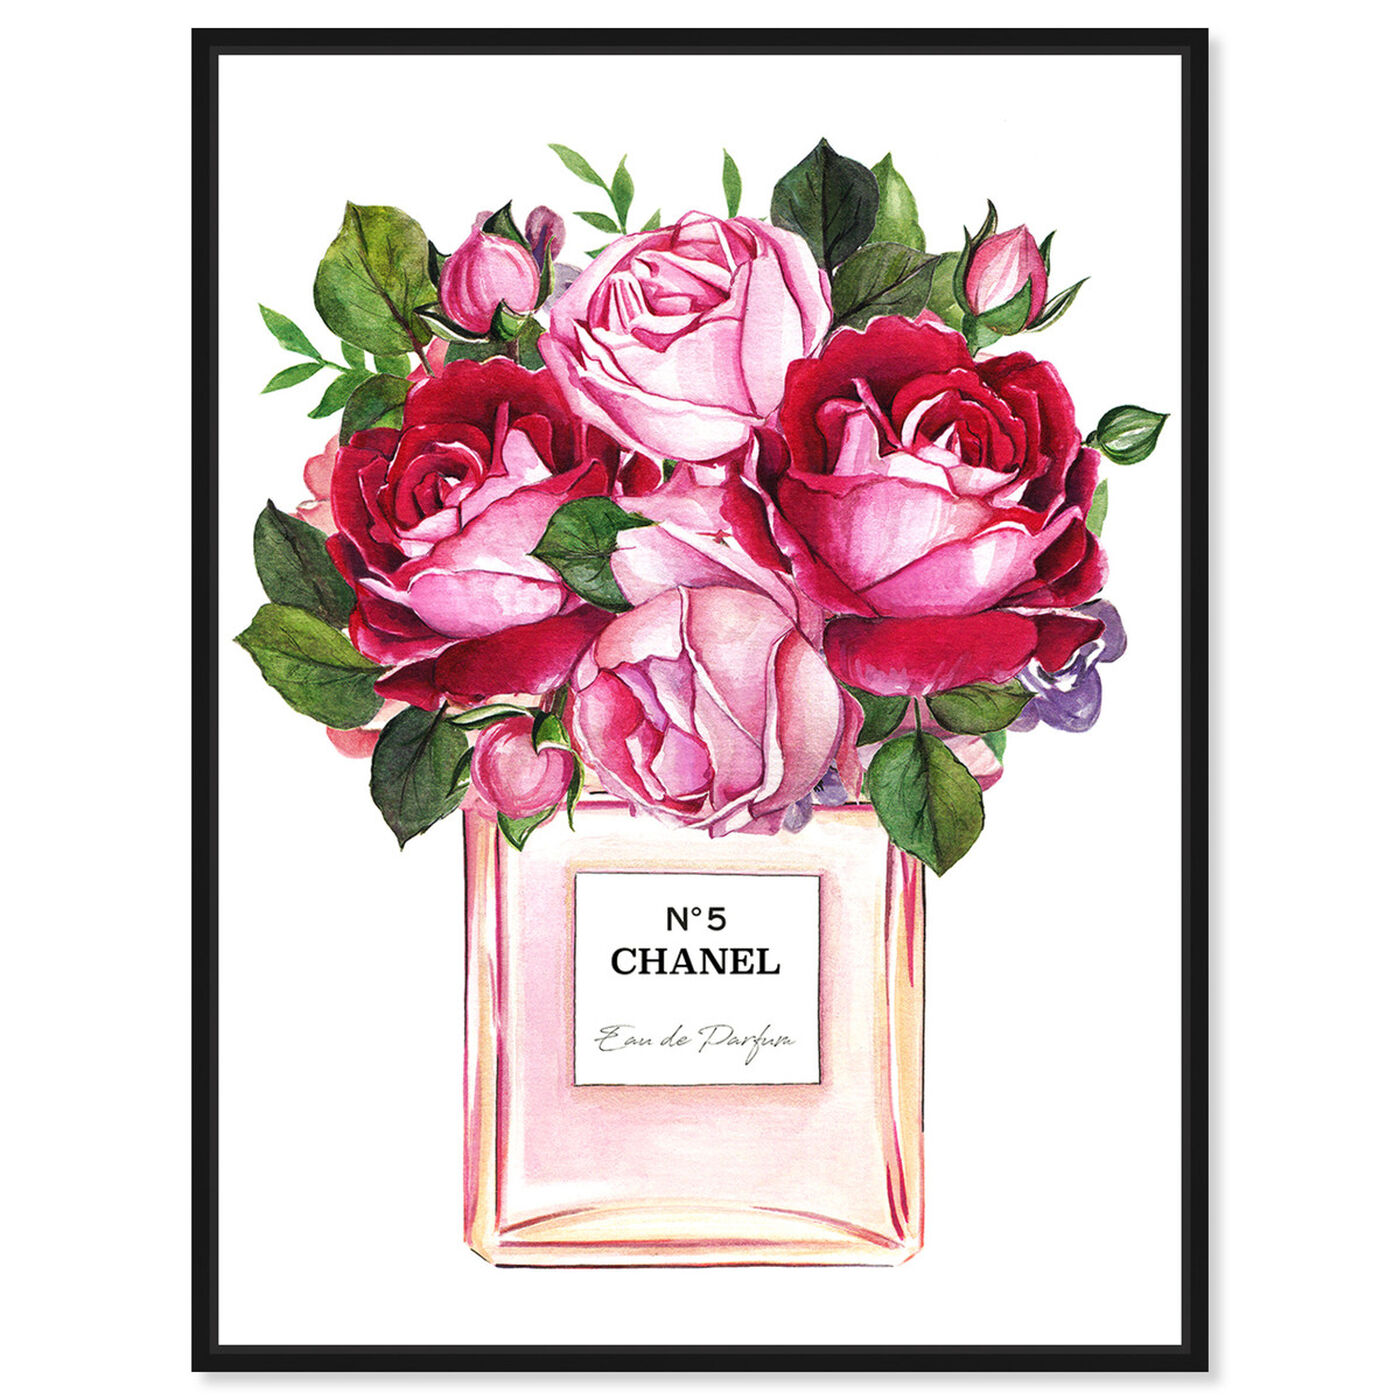 Oliver Gal 'Doll Memories-Bouquet in Trunk' Fashion and Glam Wall Art  Canvas Print - Brown, Pink - Bed Bath & Beyond - 26233696